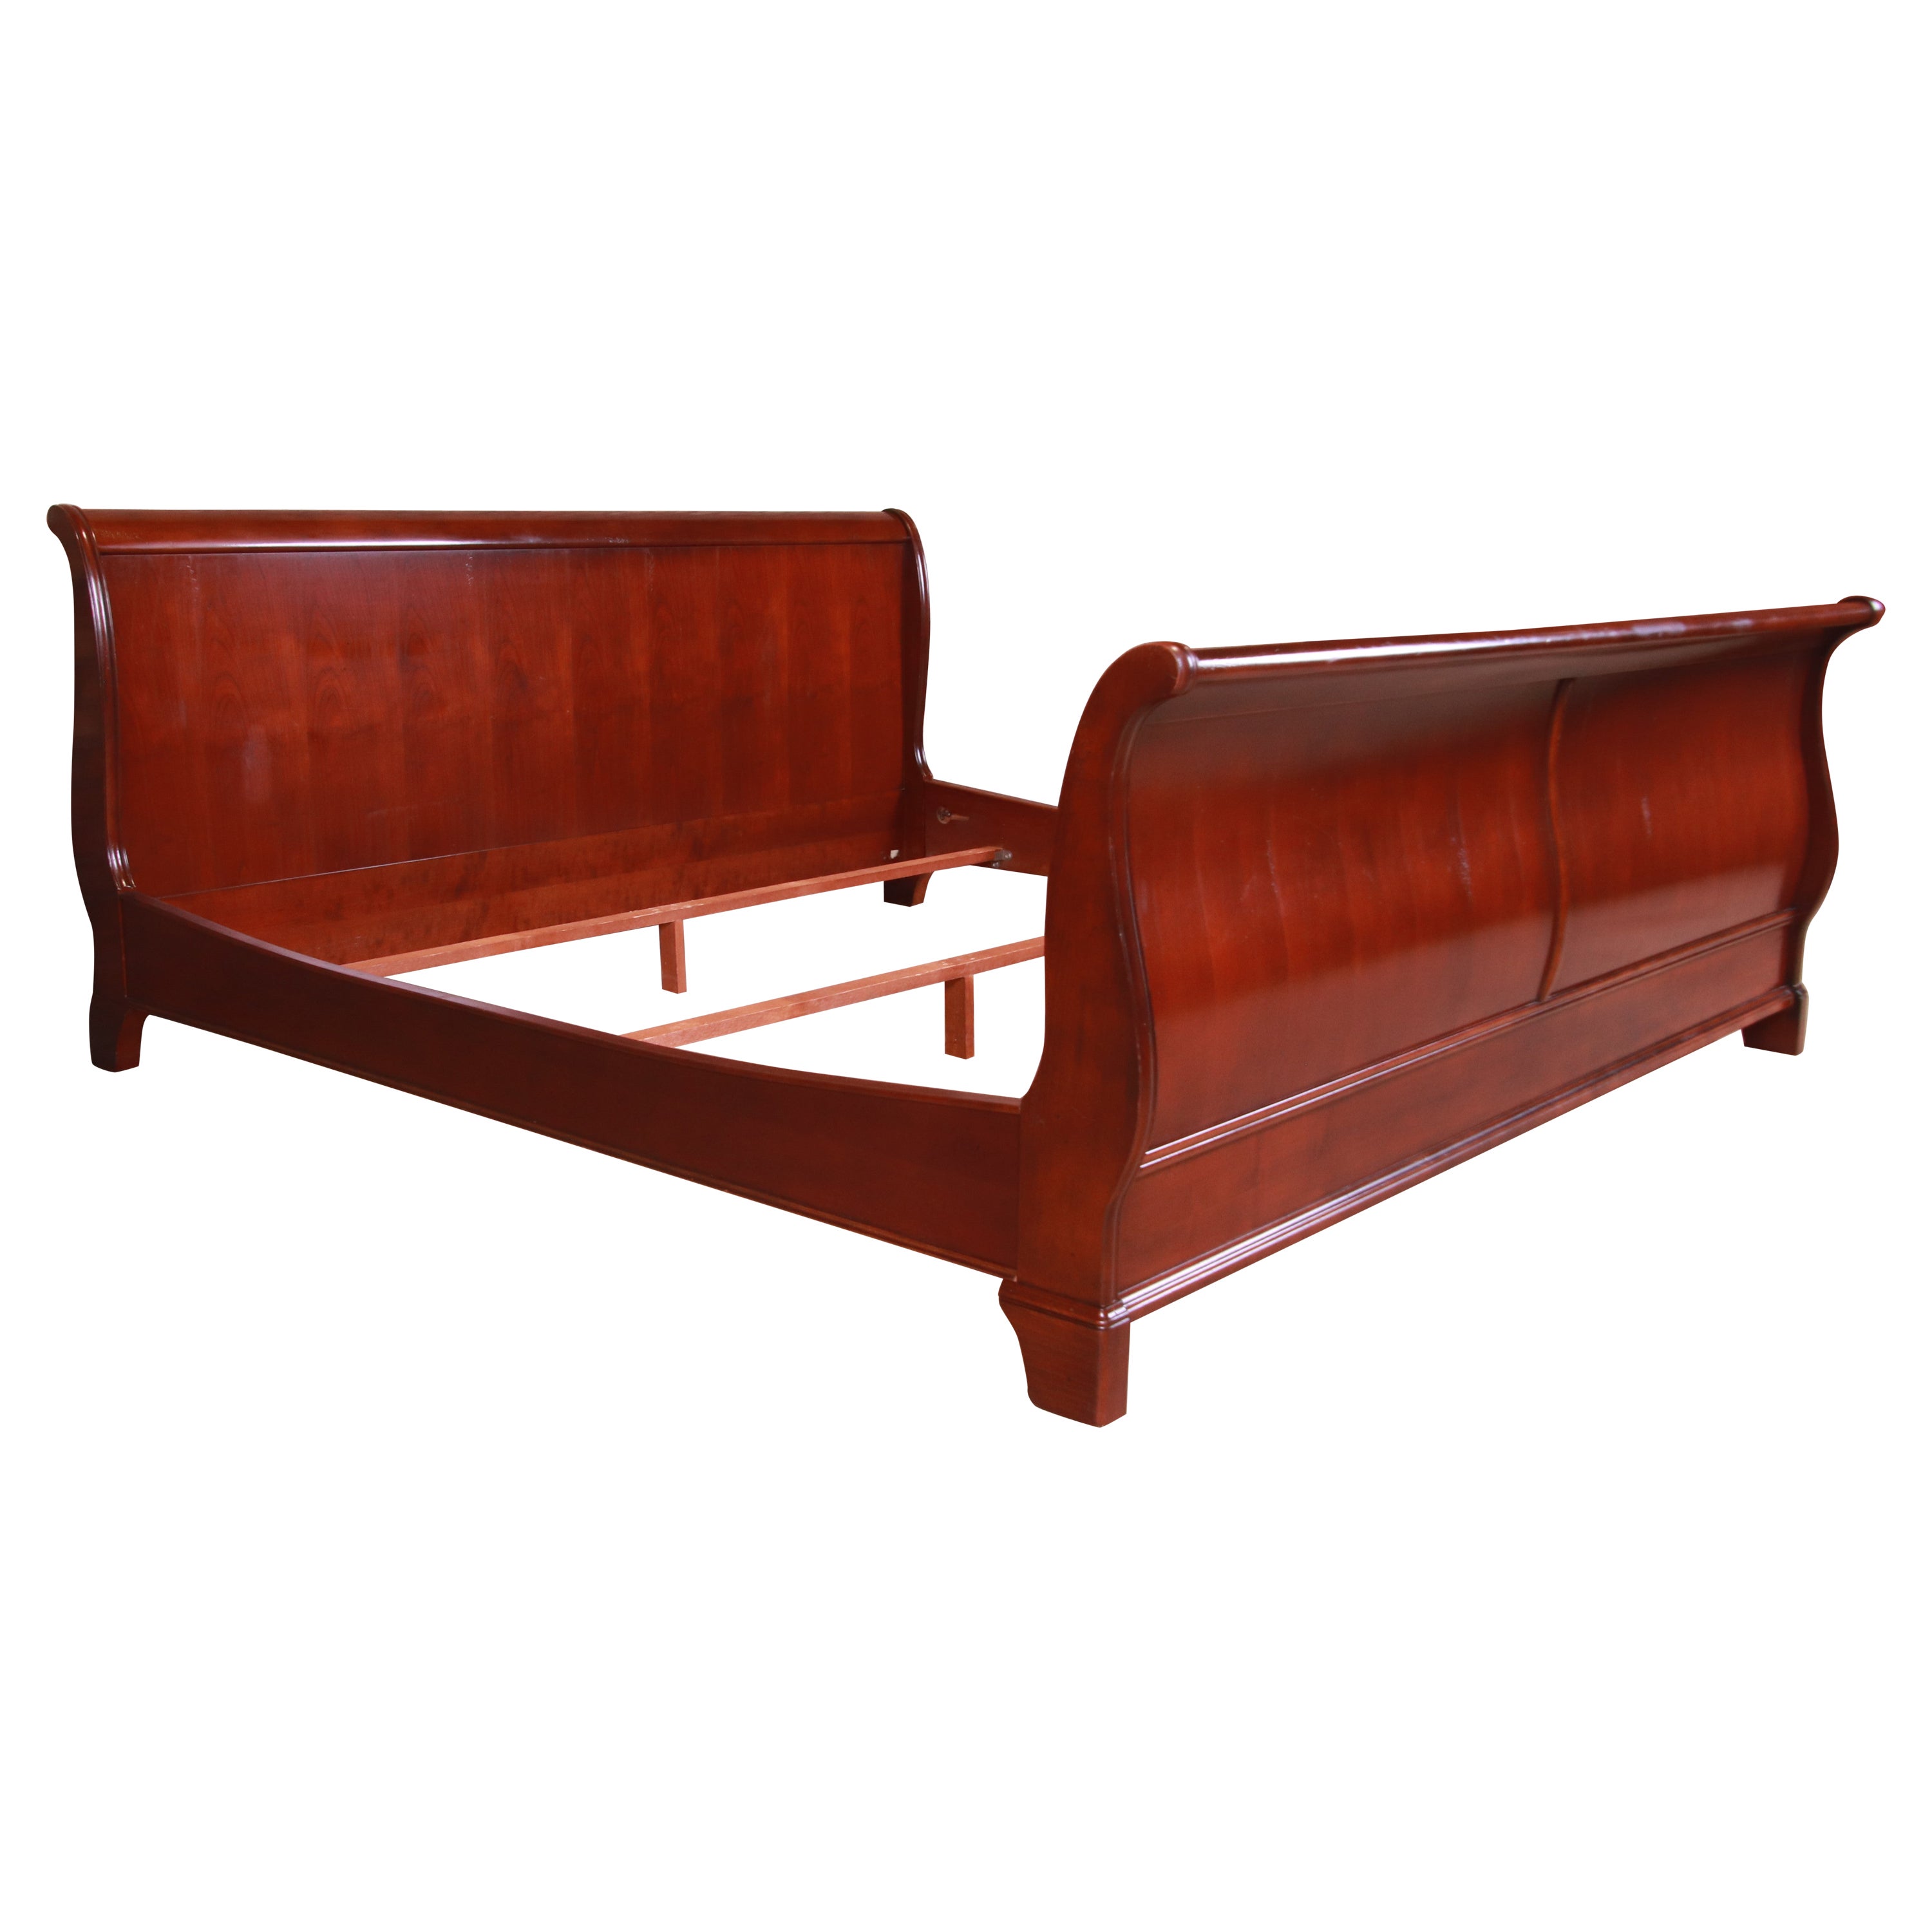 Louis Philippe Cherry Wood King Size, Wood Sleigh Bed King Size